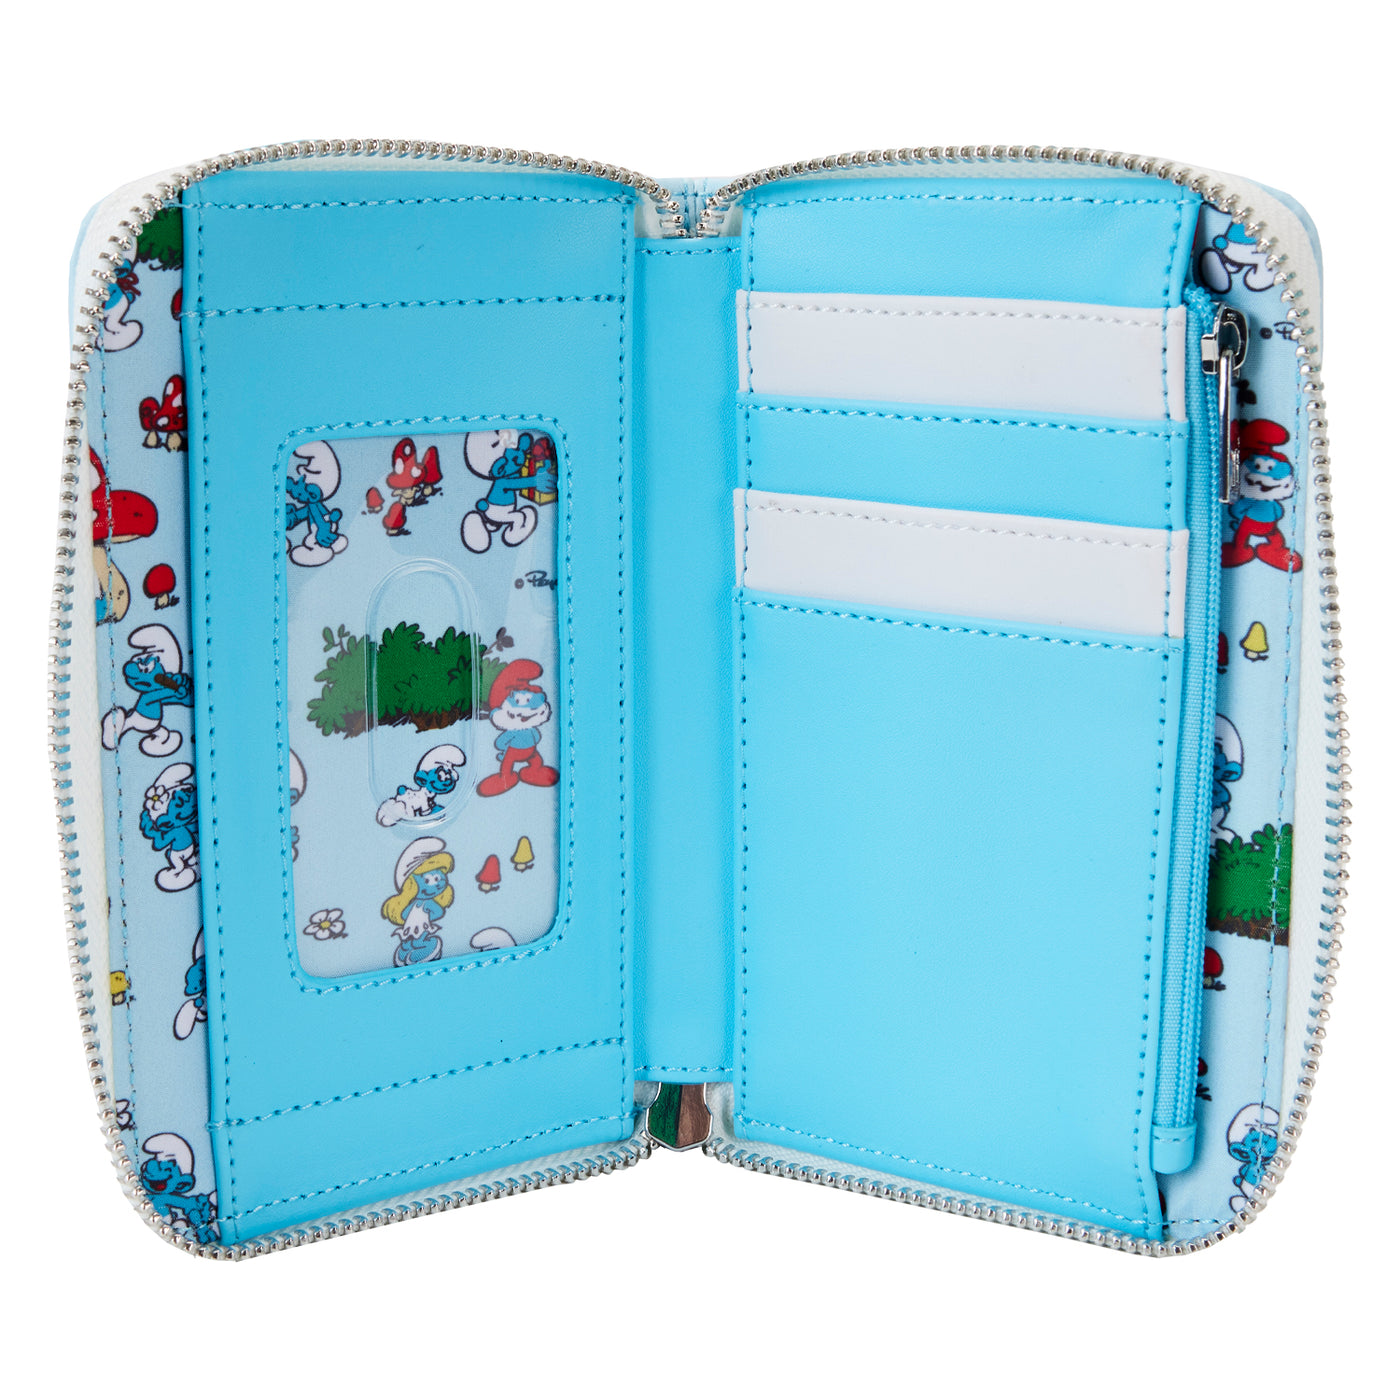 Loungefly The Smurfs Smurfette Cosplay Wallet